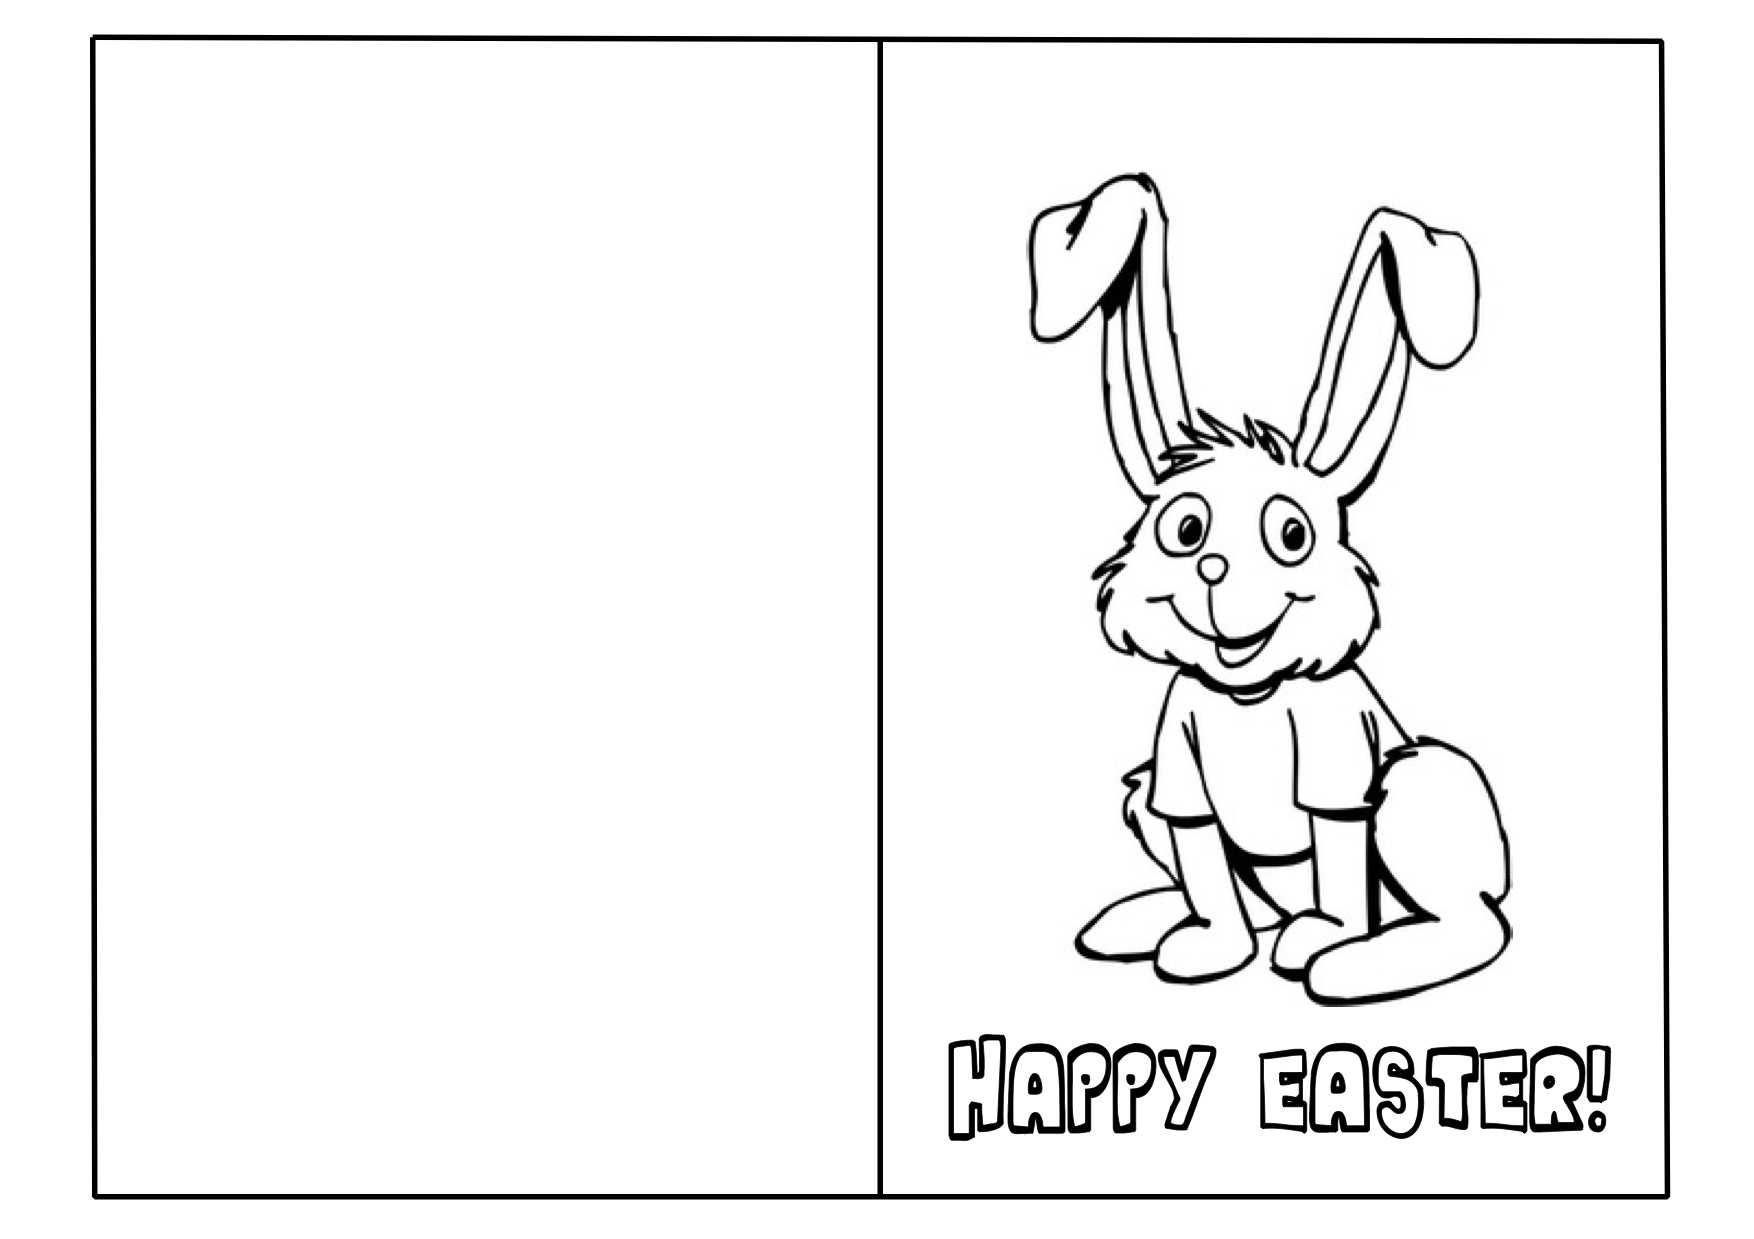 Easter Card Template Ks2 1 – Happy Easter Sunday Intended For Easter Card Template Ks2